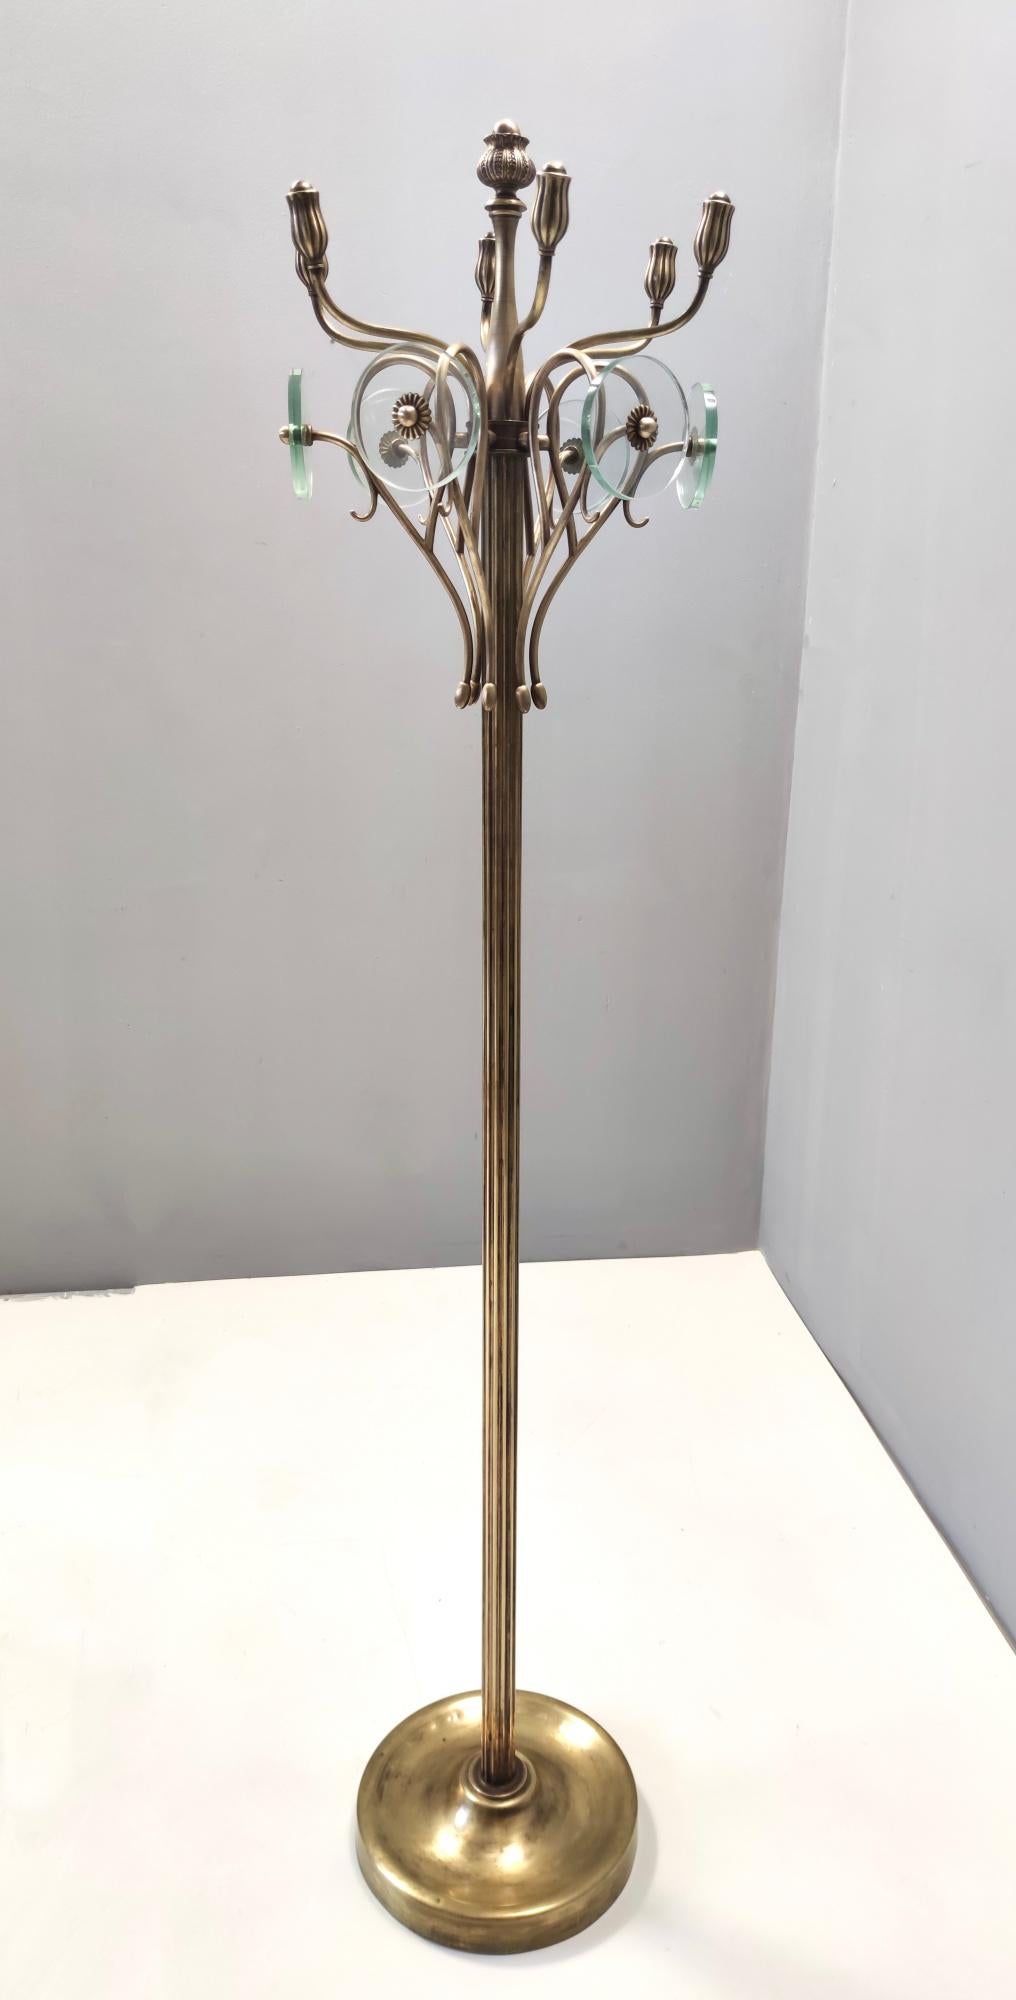 Mid-20th Century Vintage Revolving Brass and Glass Coat Rack Ascribable to Fontana Arte, Italy For Sale